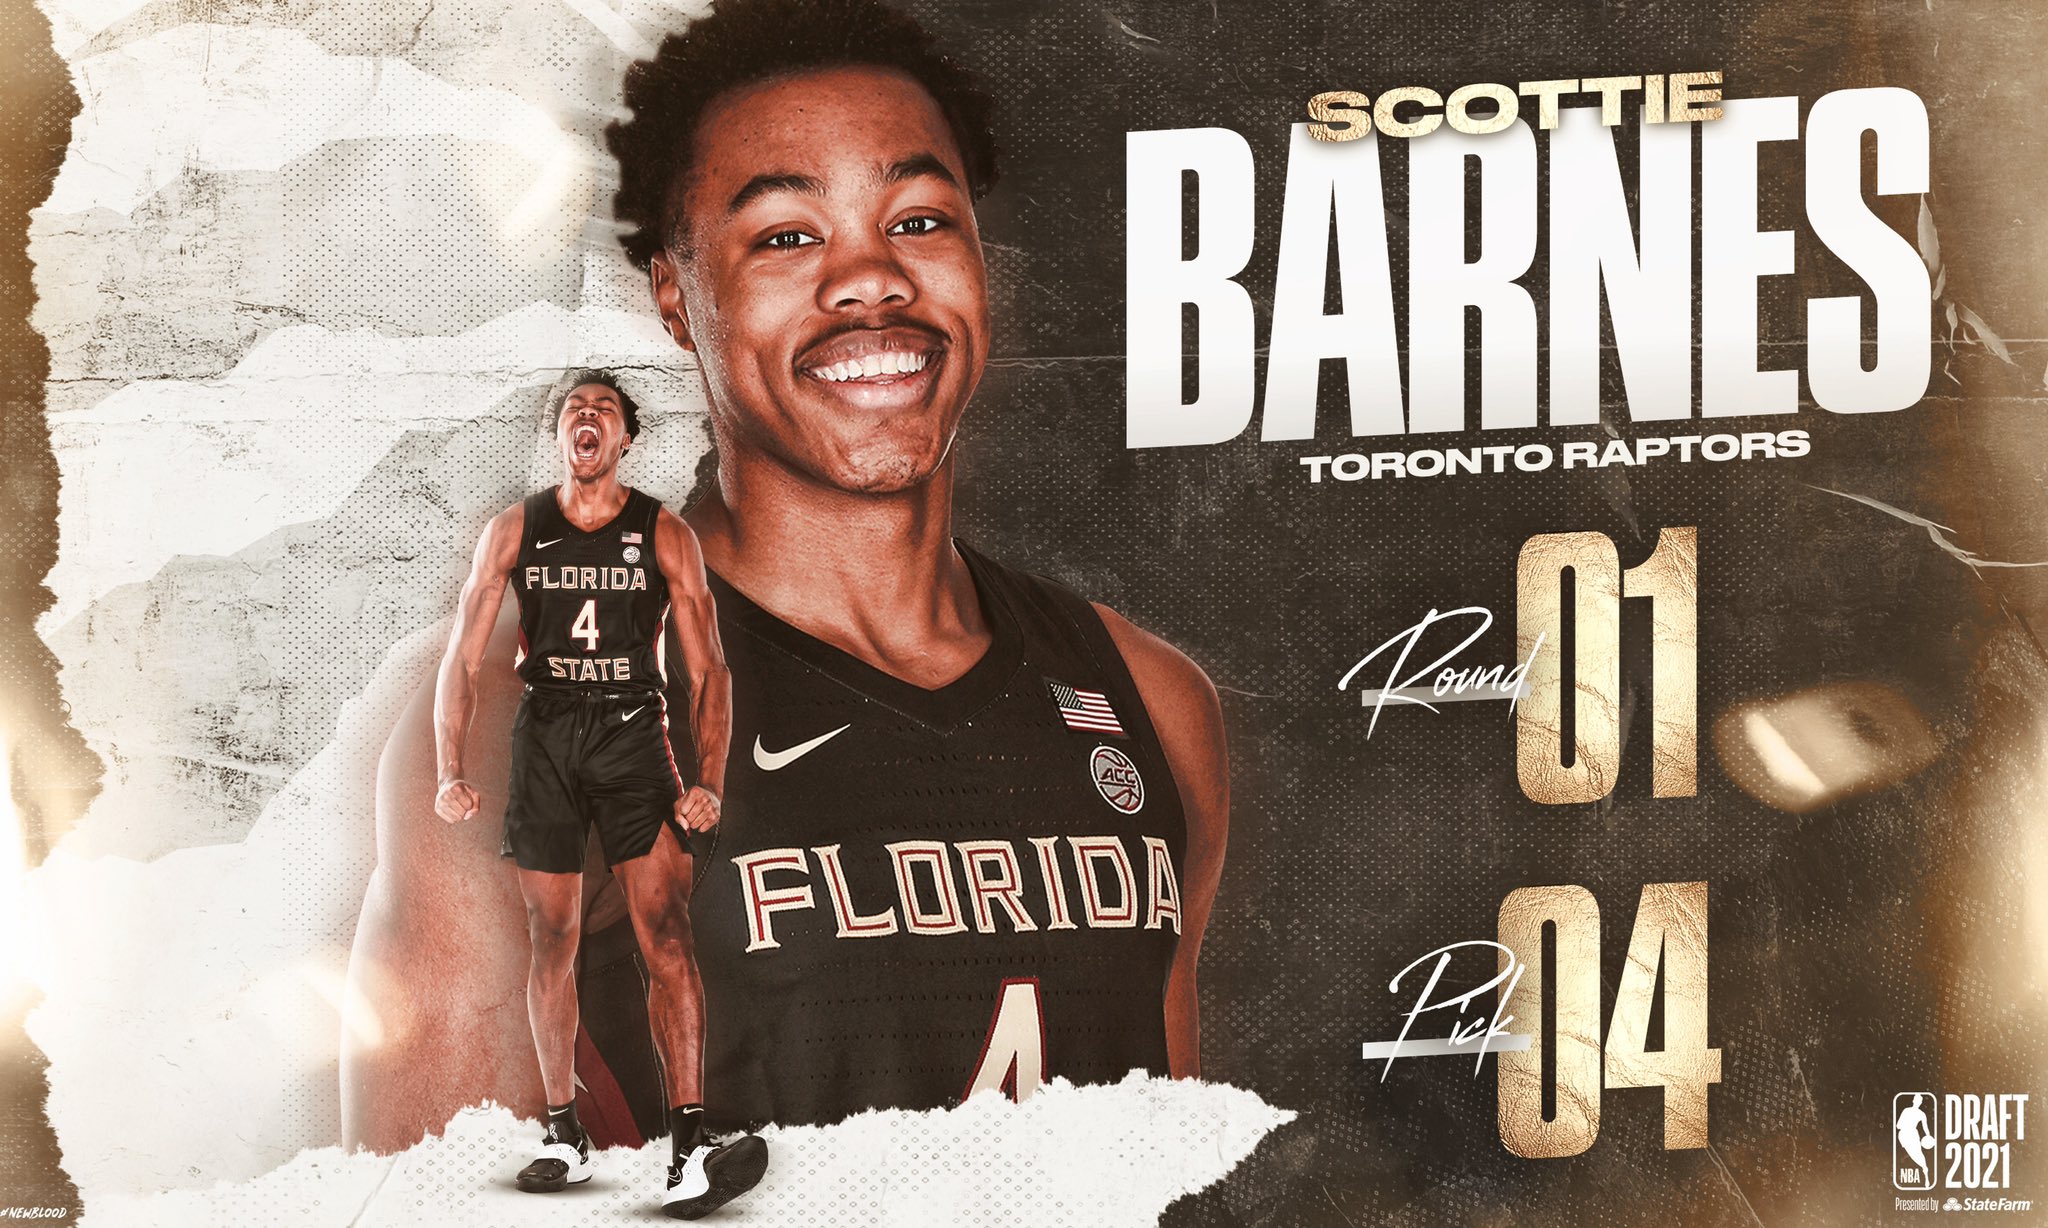 Scottie Barnes selected fourth overall by the Toronto Raptors in